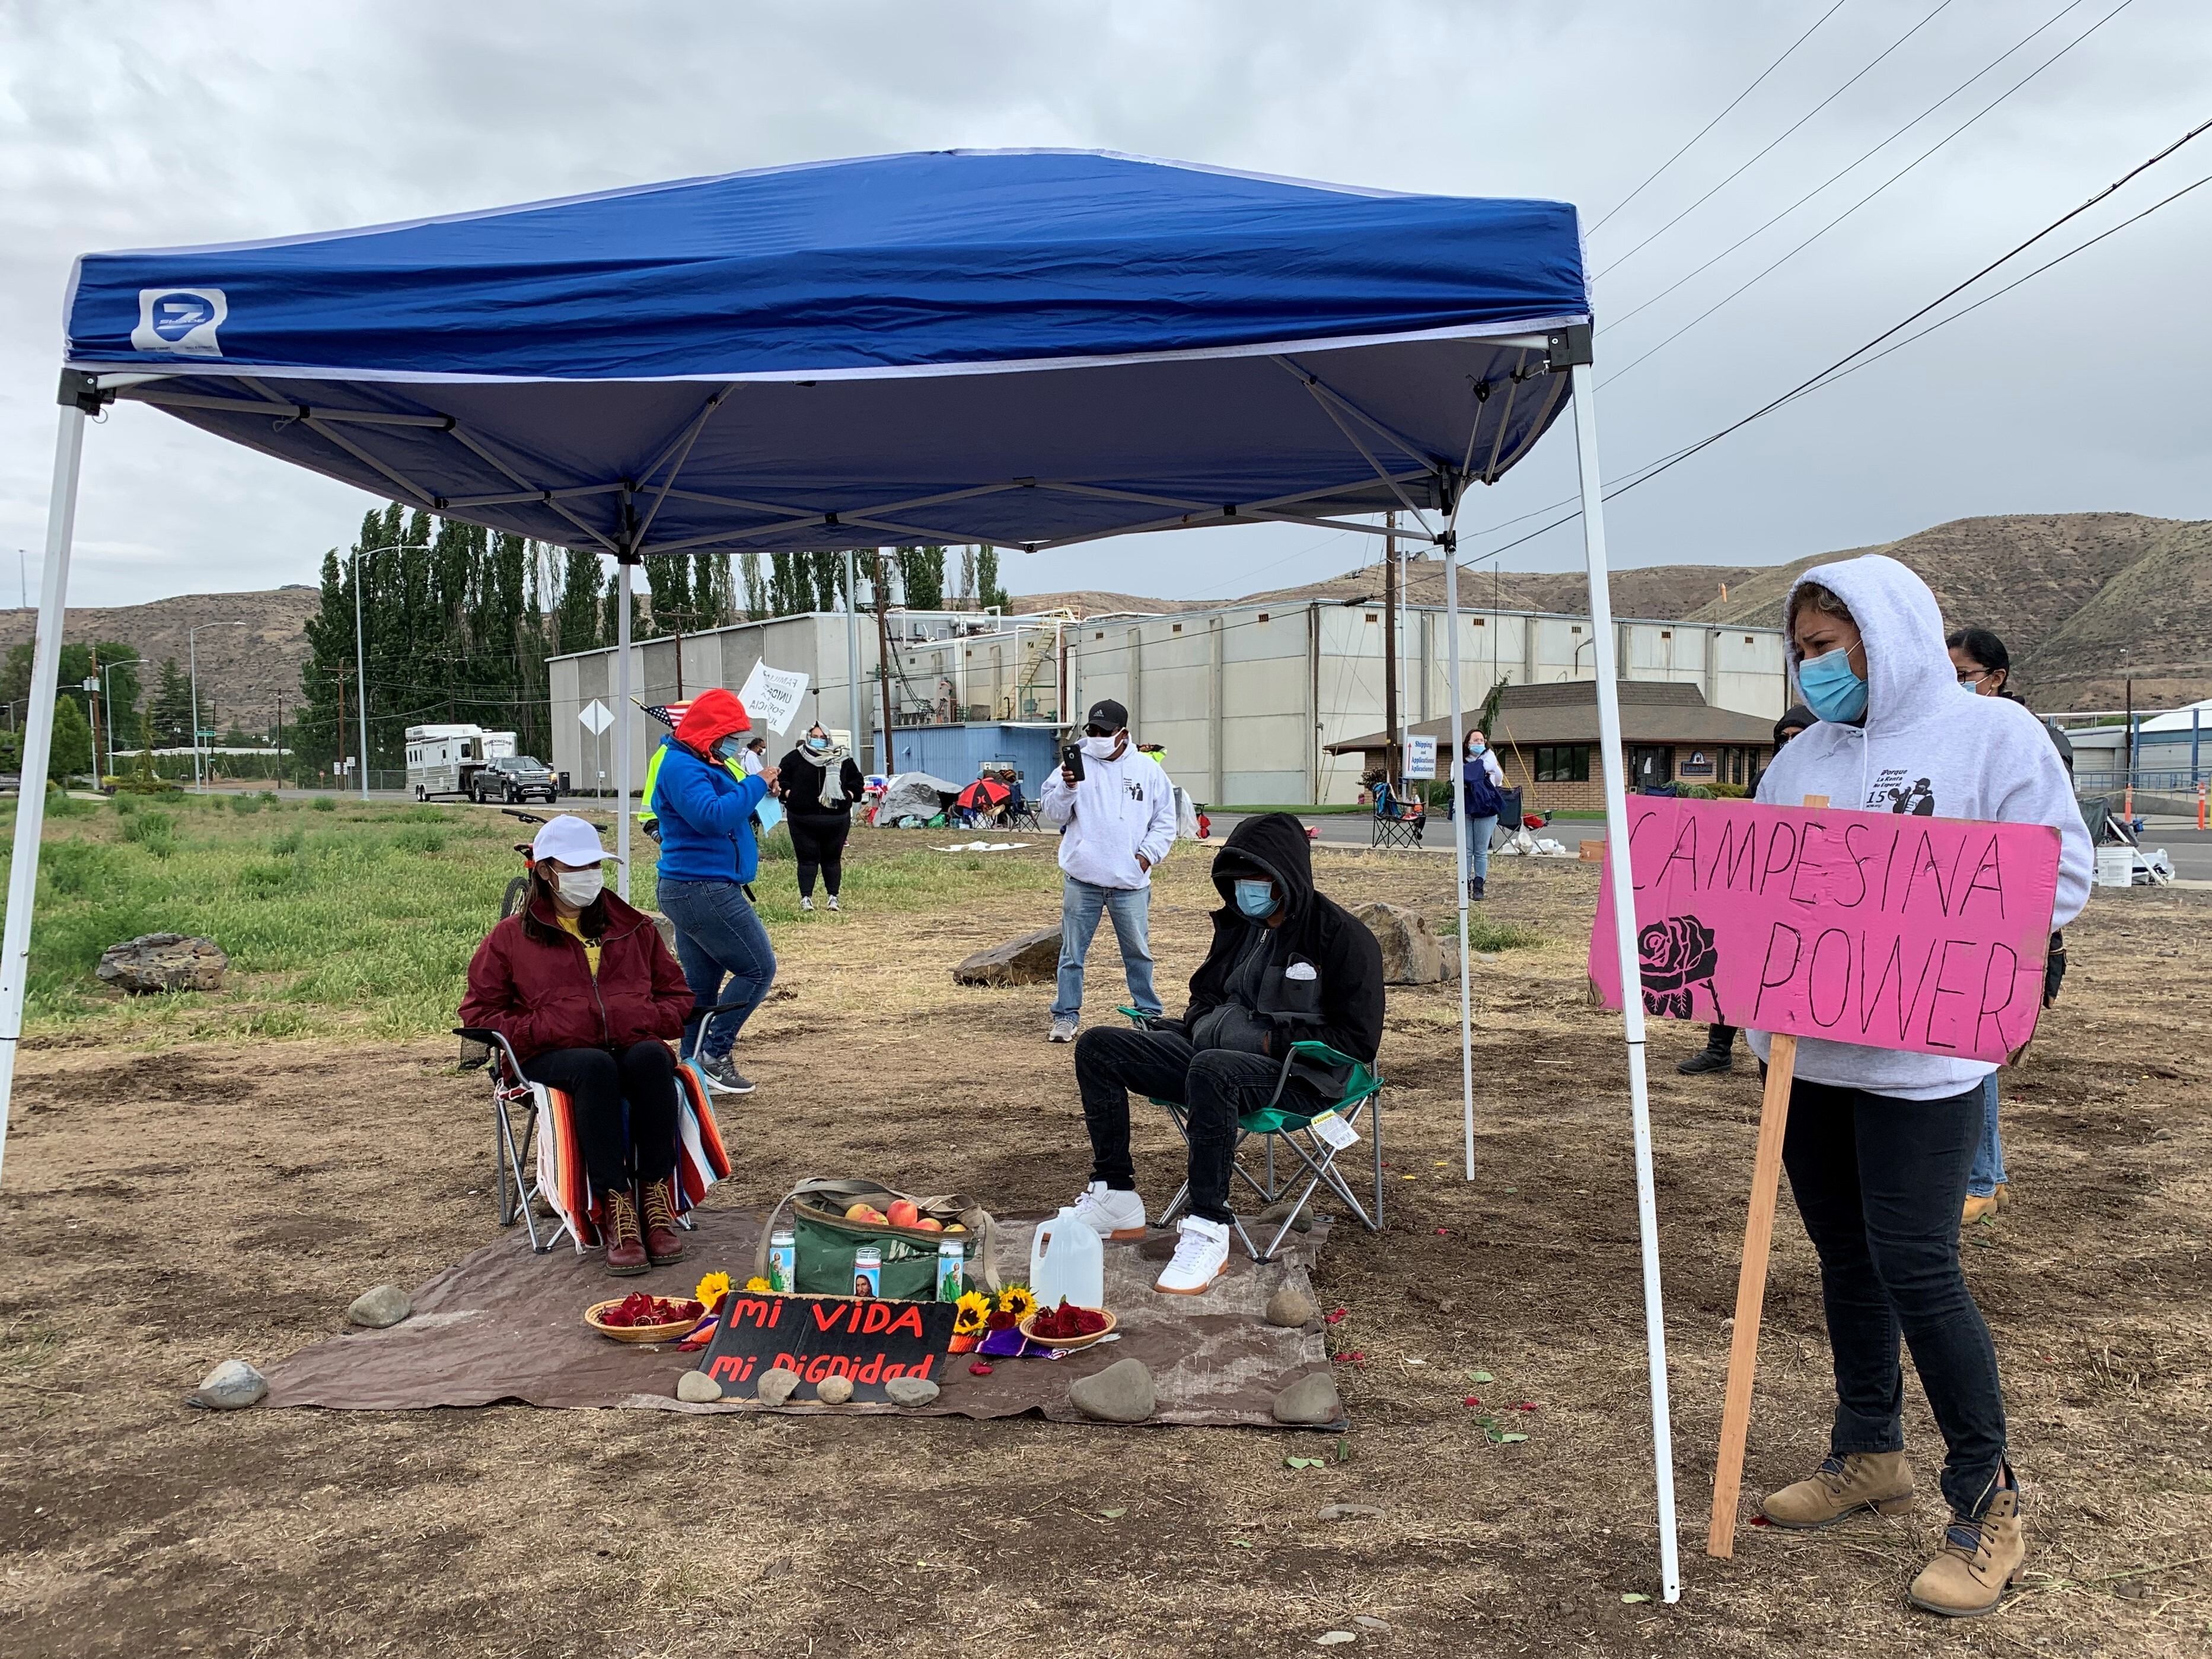 Elvira Medina and Cesar Gonzalez sit by a makeshift altar Tuesday, May 19 after launching a hunger strike, protesting stalled negotiations with their employer Allan Brothers Fruit and demanding a $2 dollar an hour increase in pay. CREDIT: Enrique Pérez de la Rosa/NWPB